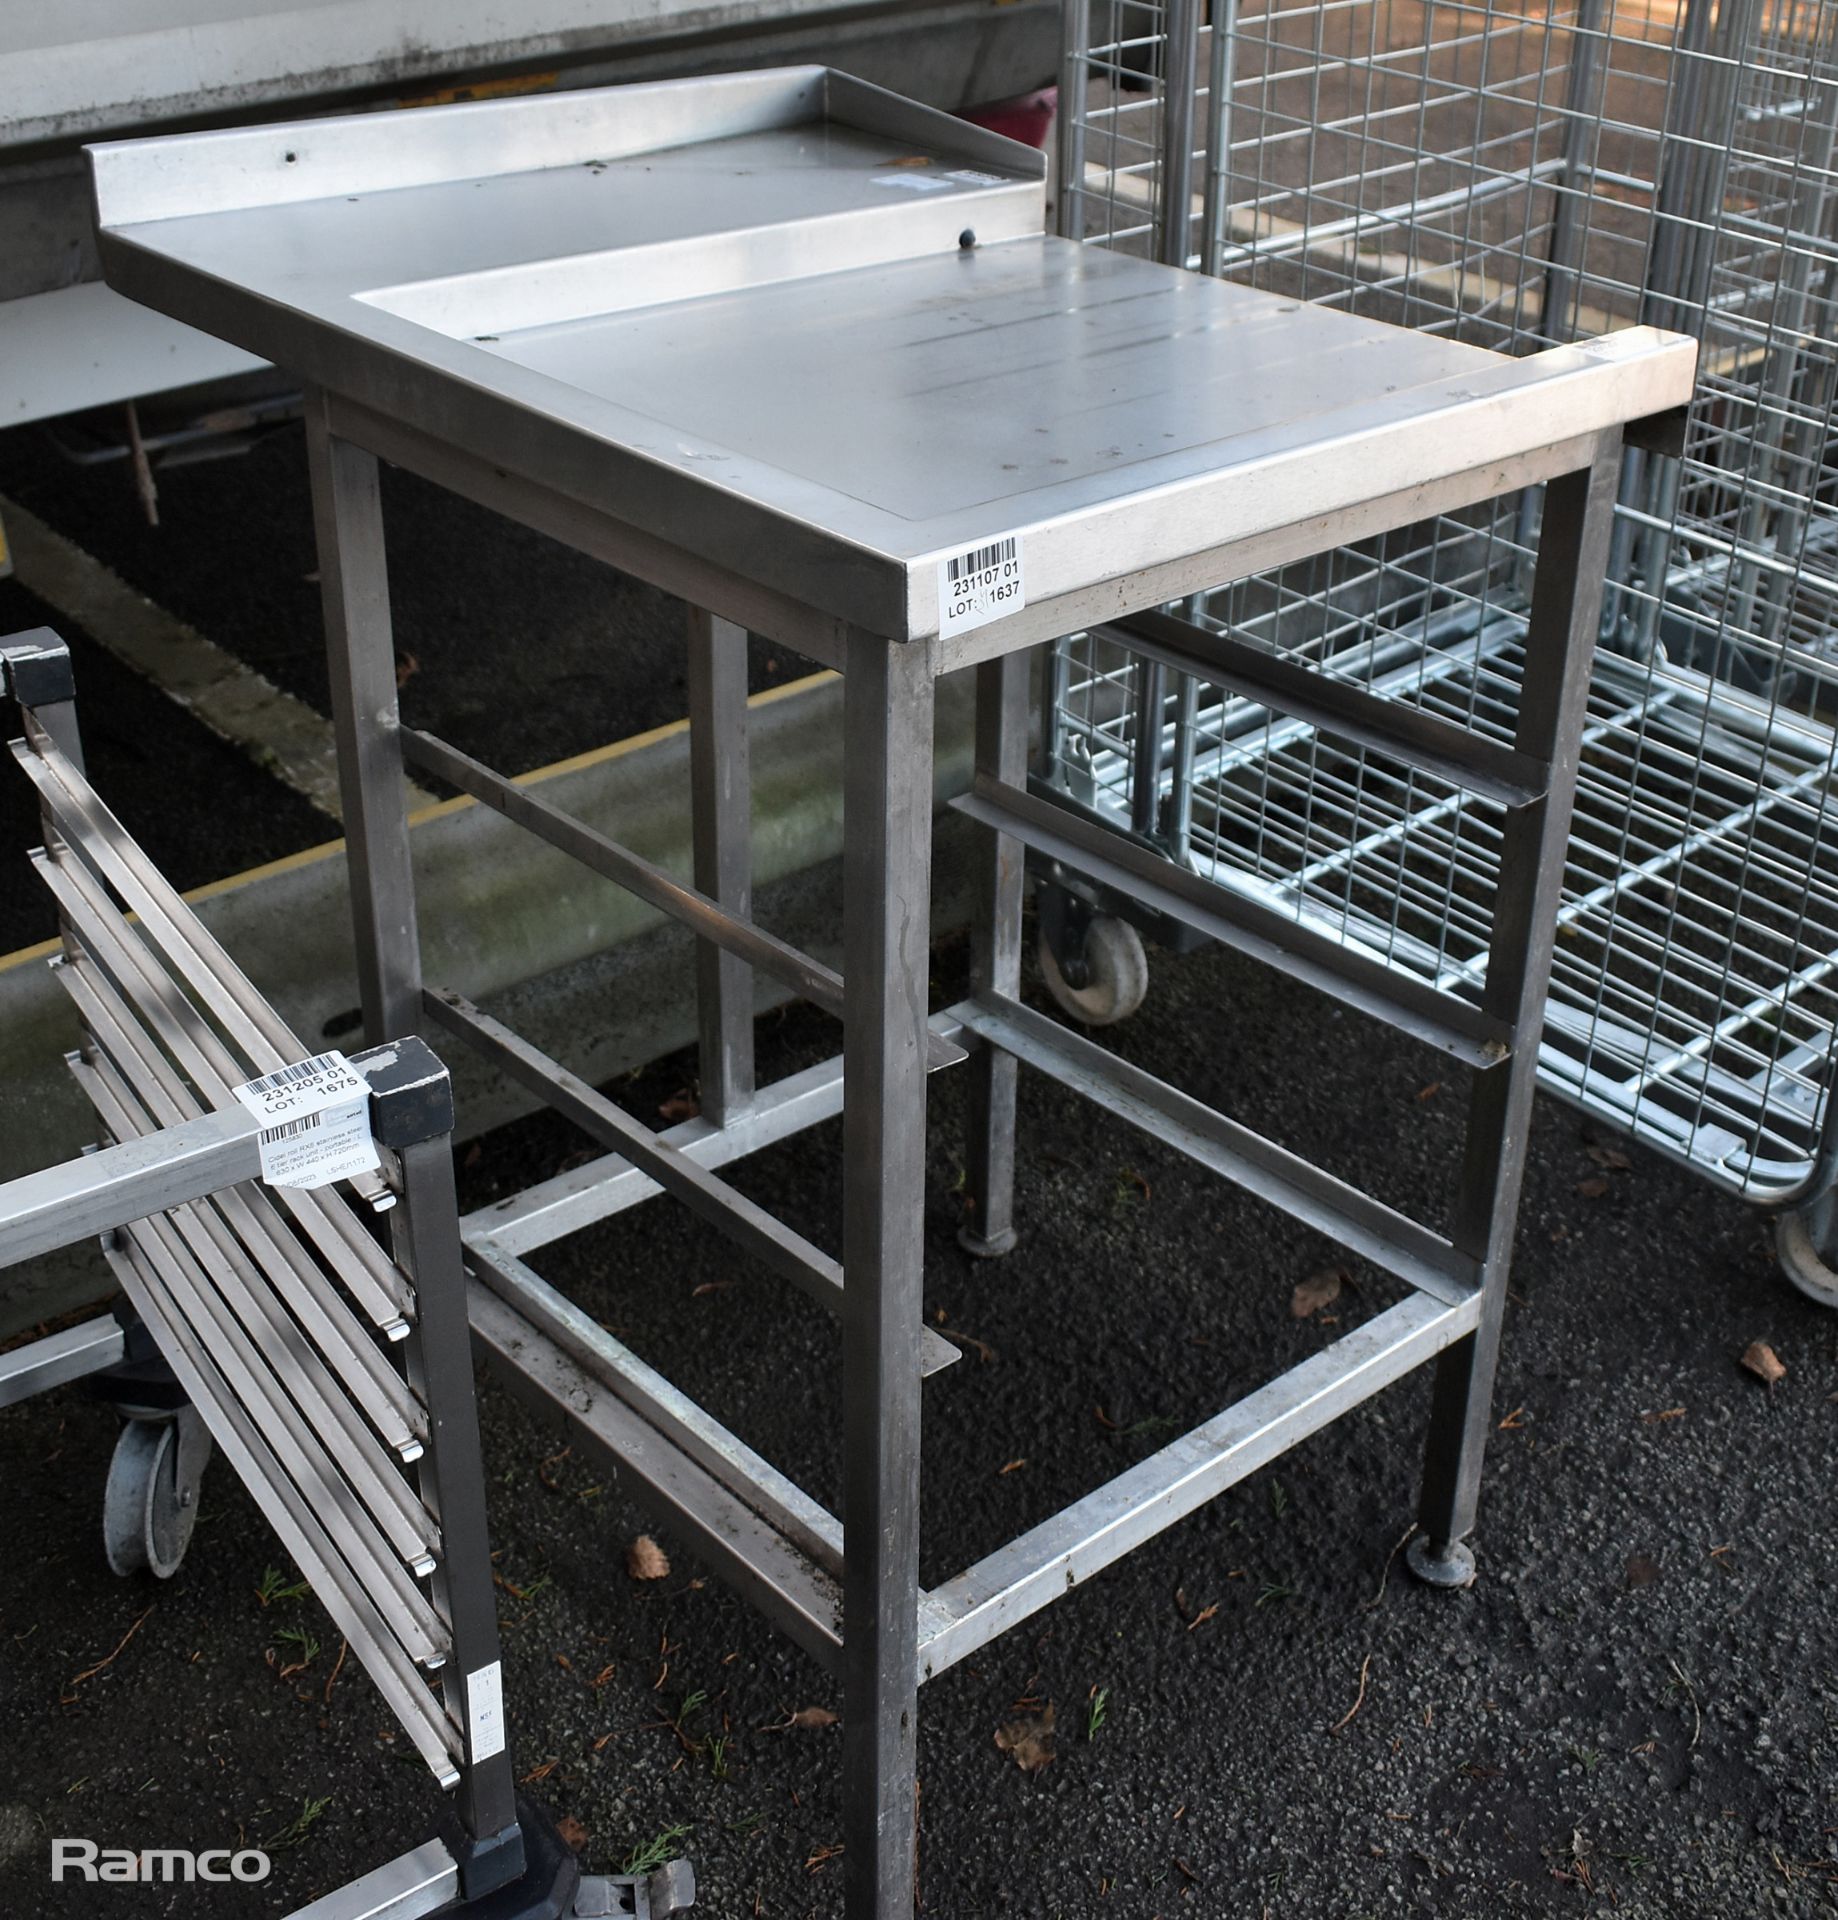 Stainless steel dishwasher run off table - W 830 x D 600 x H 960 mm - Image 2 of 3